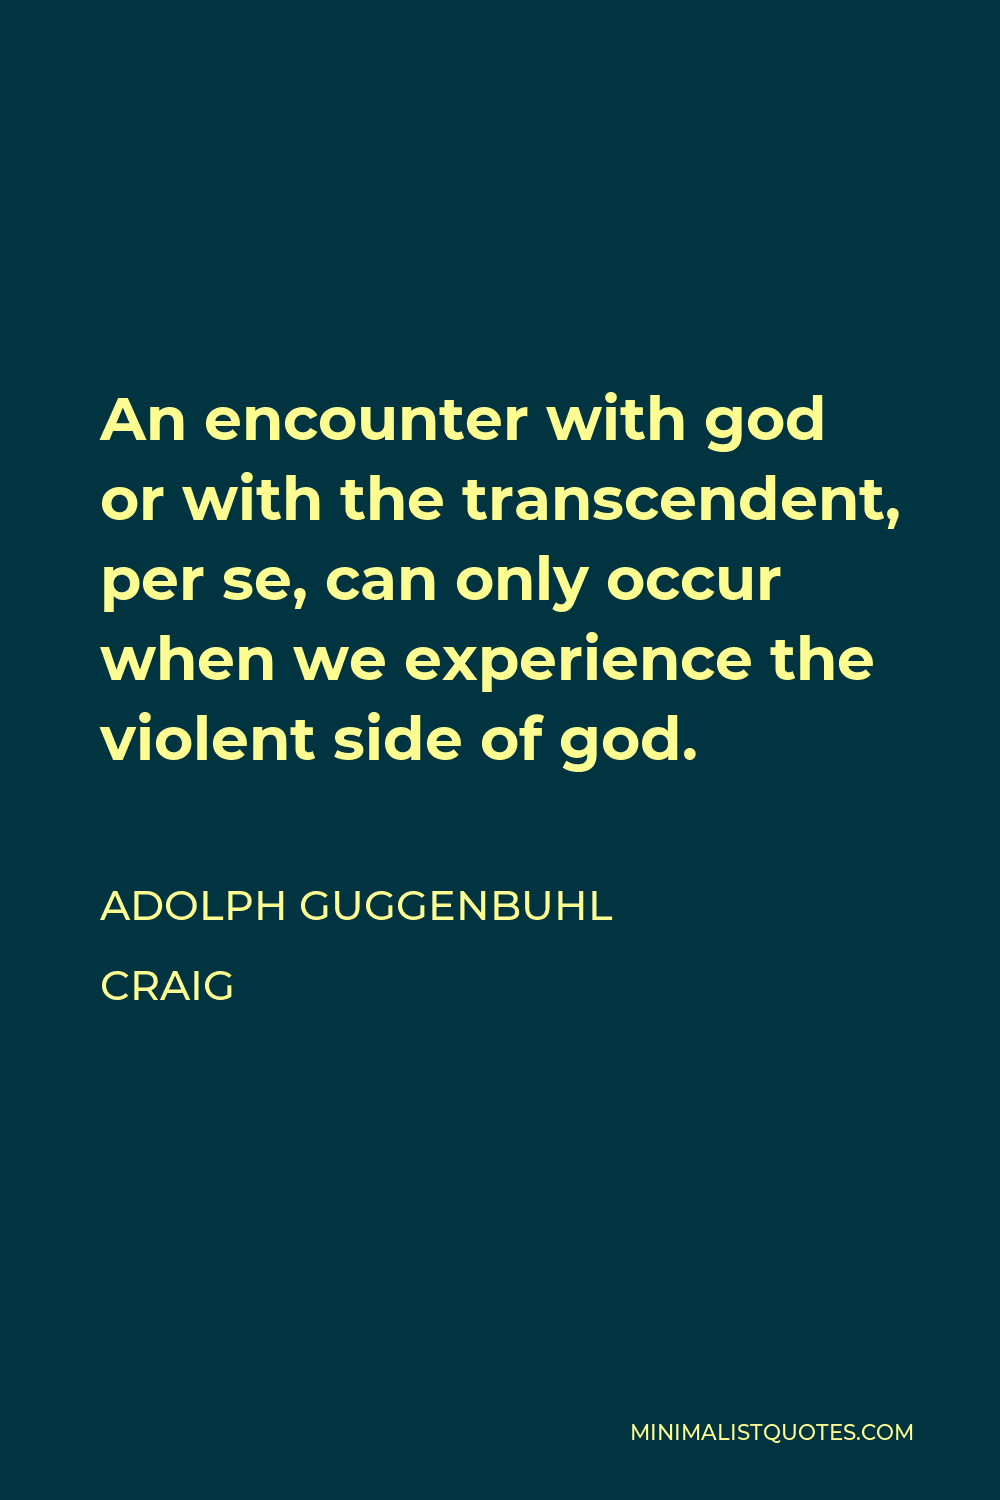 Adolph Guggenbuhl Craig Quote - An encounter with god or with the transcendent, per se, can only occur when we experience the violent side of god.